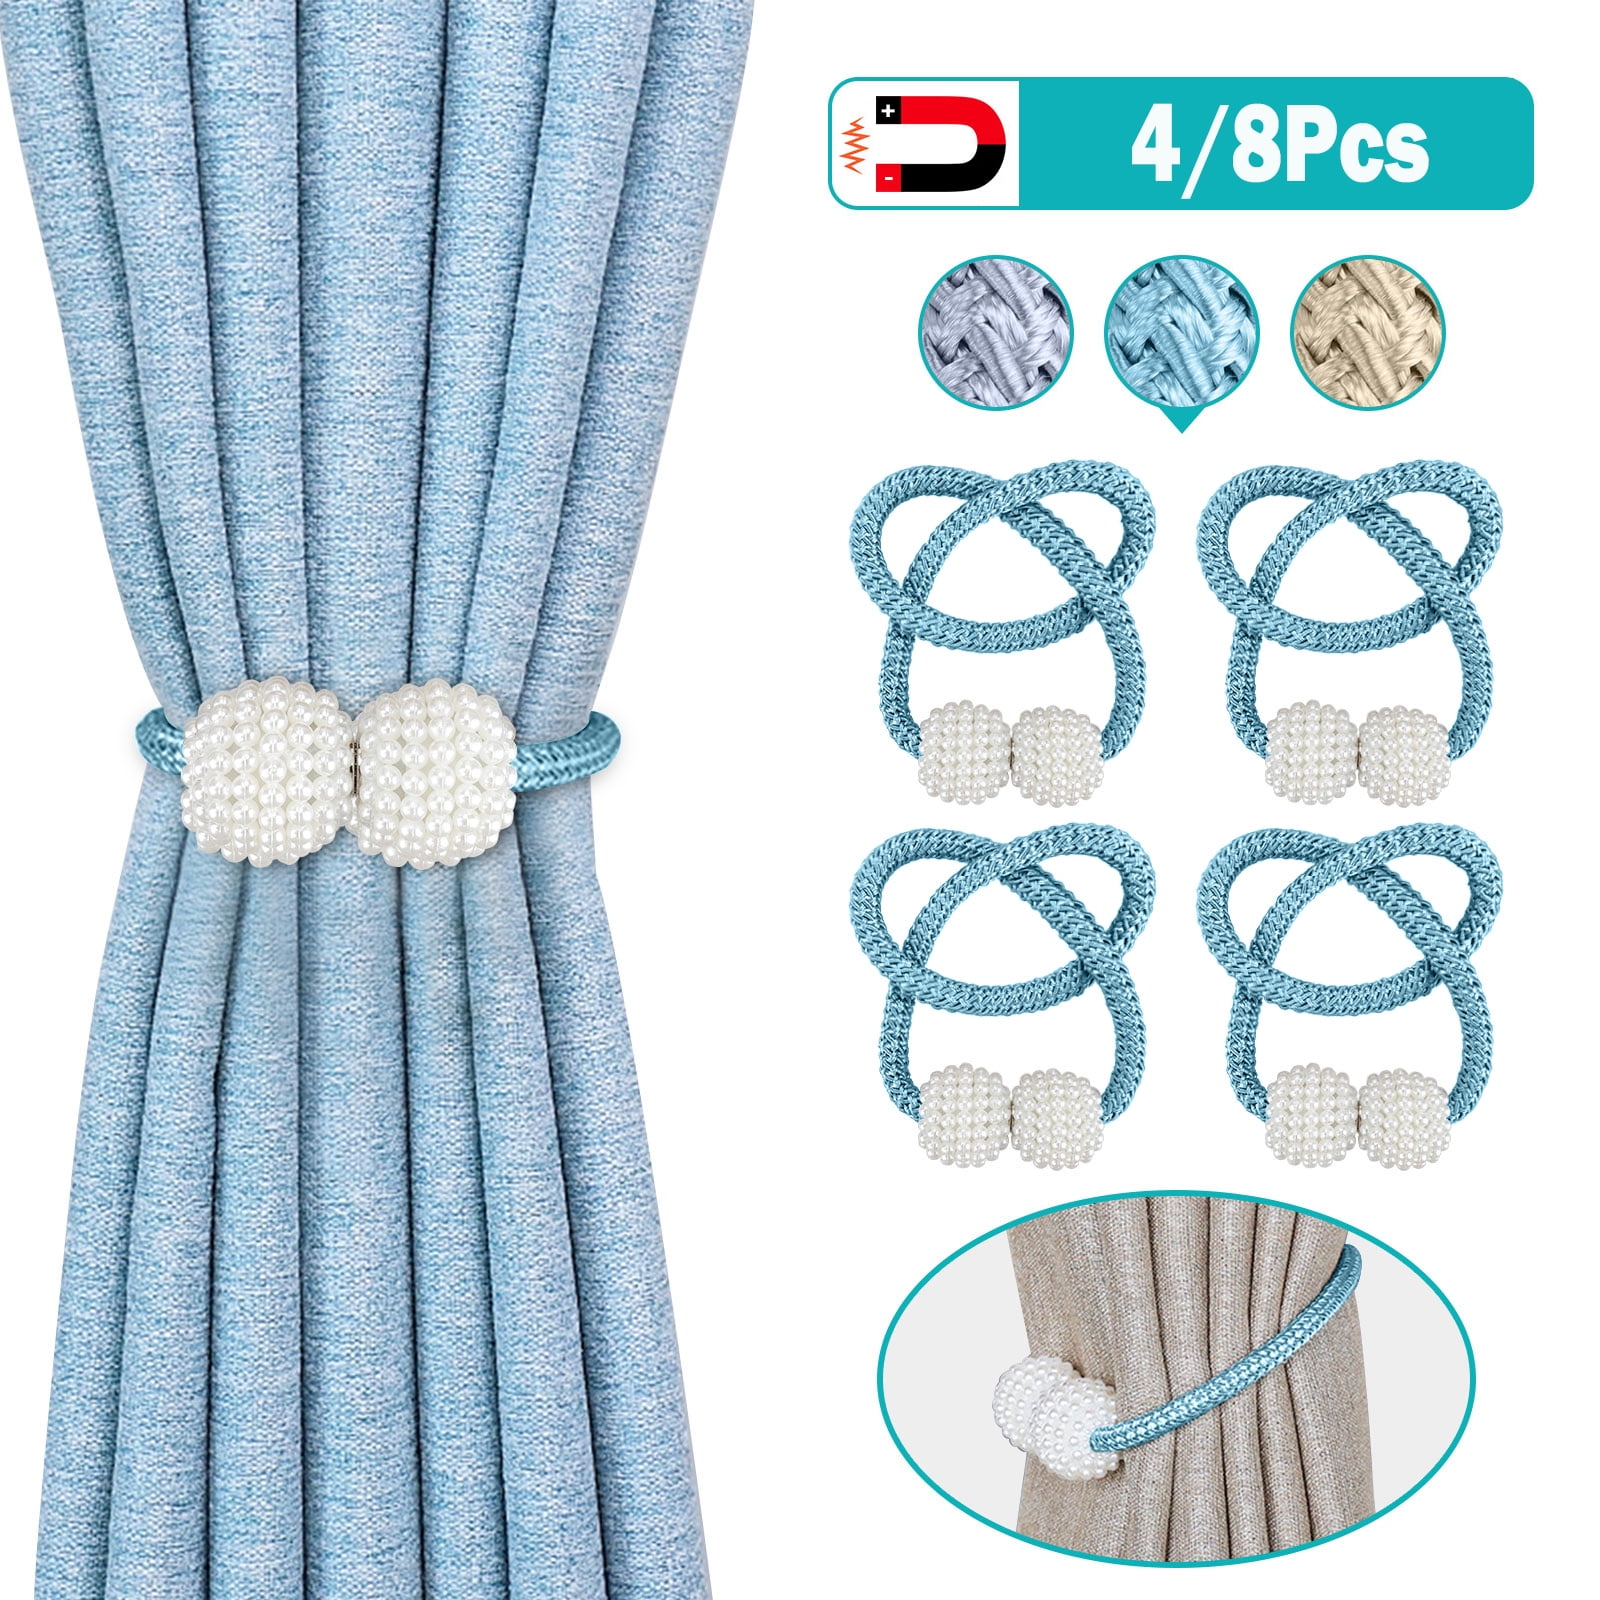 Magnetic Faux Pearl Beads Weaving Rope Curtain Tieback Ring Holder Home Decor 